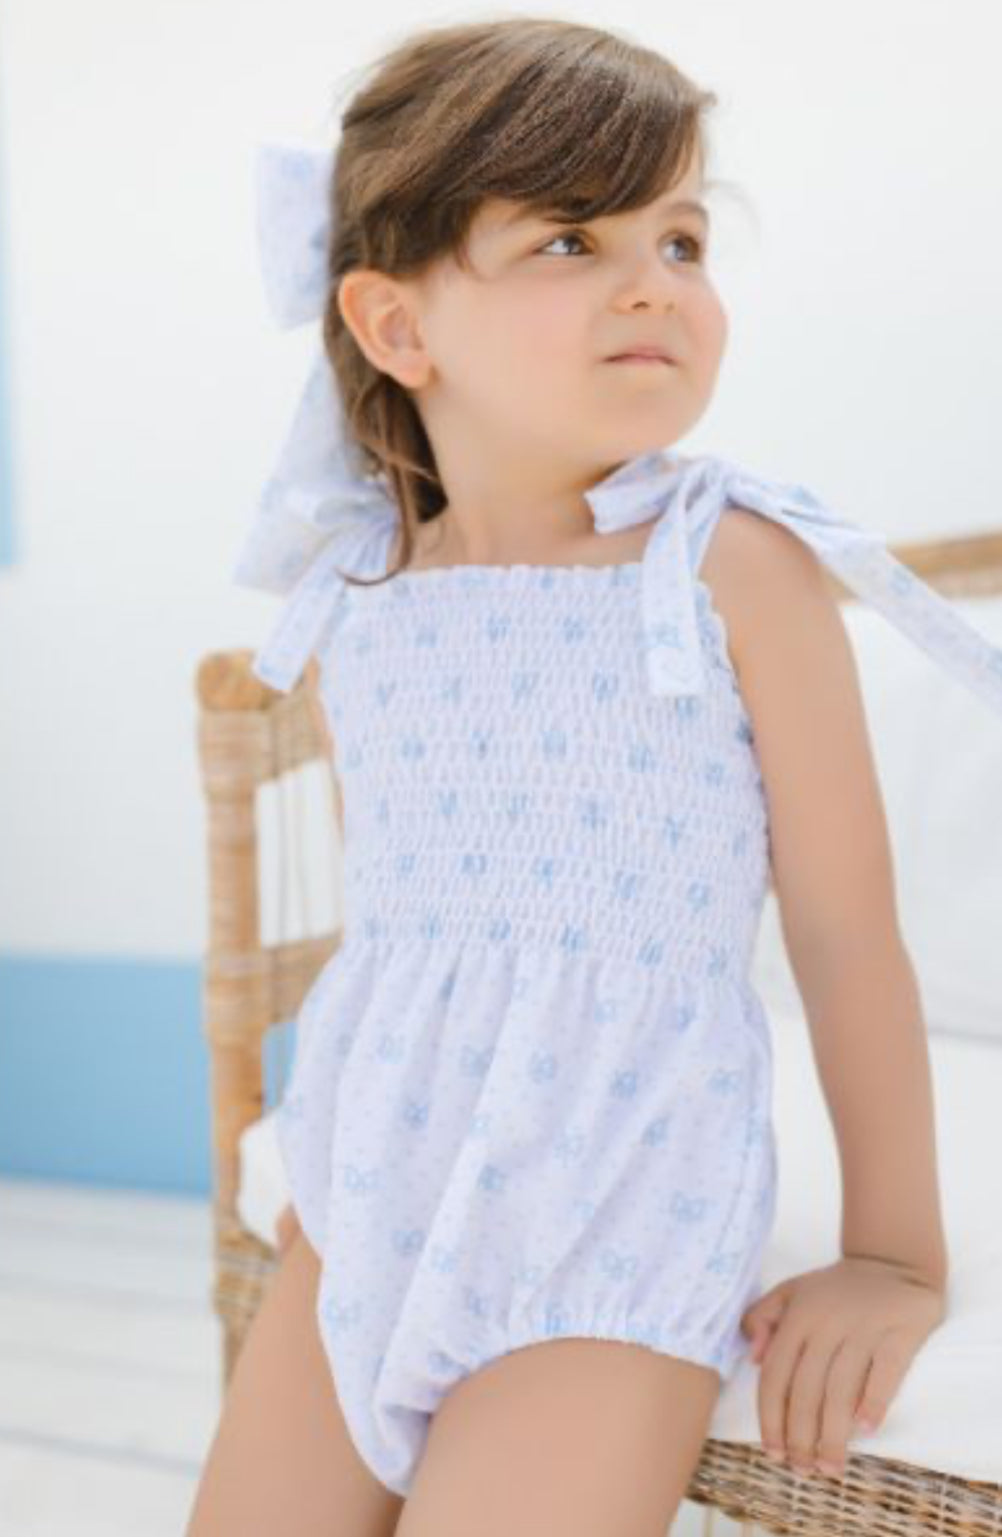 Exclusive Blue Bows Smocked Swimsuit